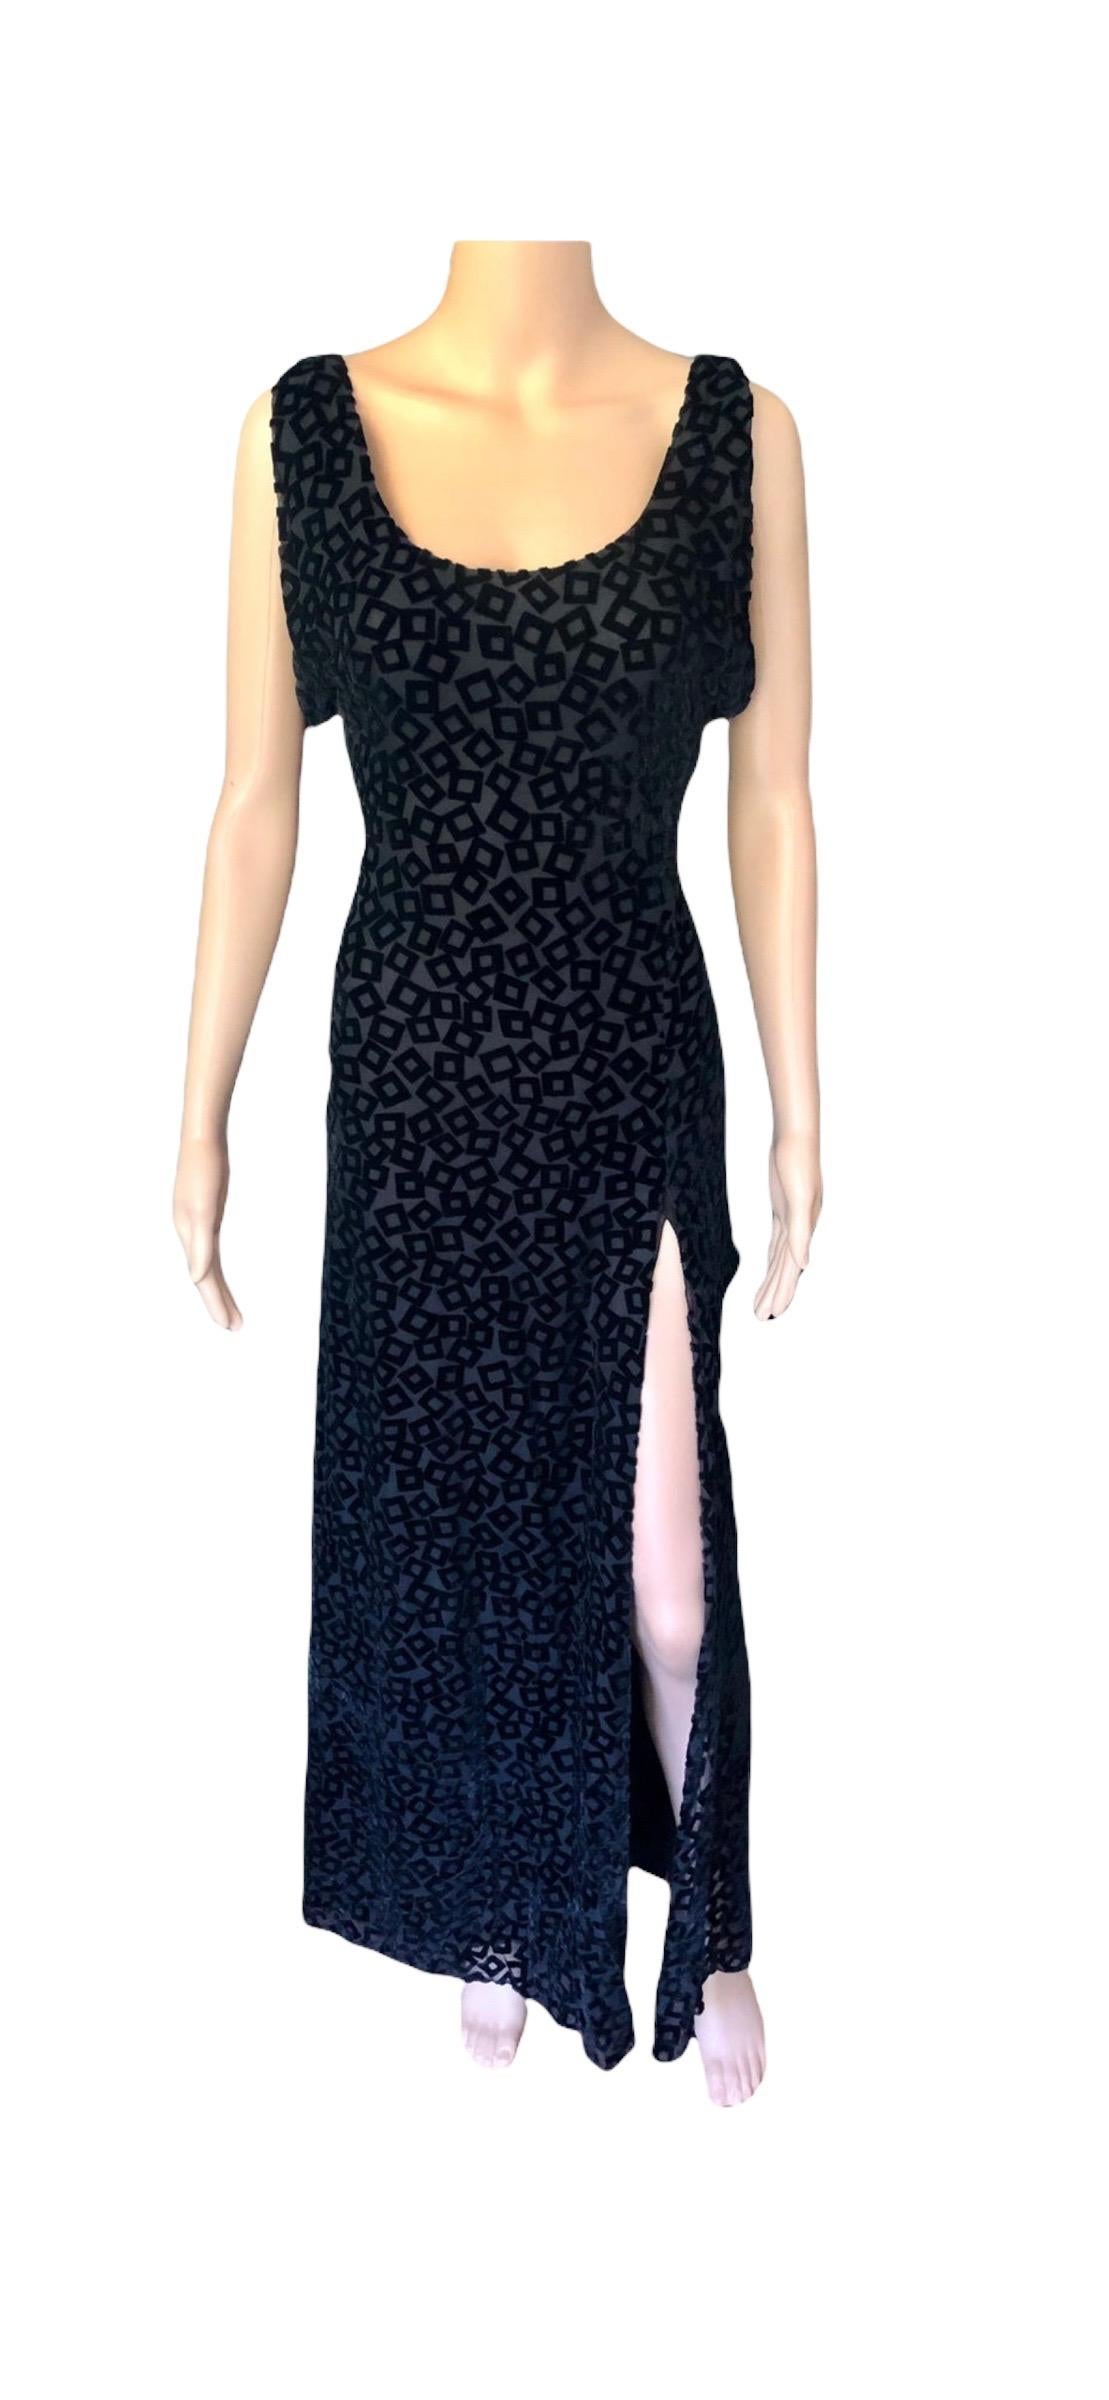 Gianni Versace S/S 1999 Vintage Black Evening Dress Gown For Sale 4